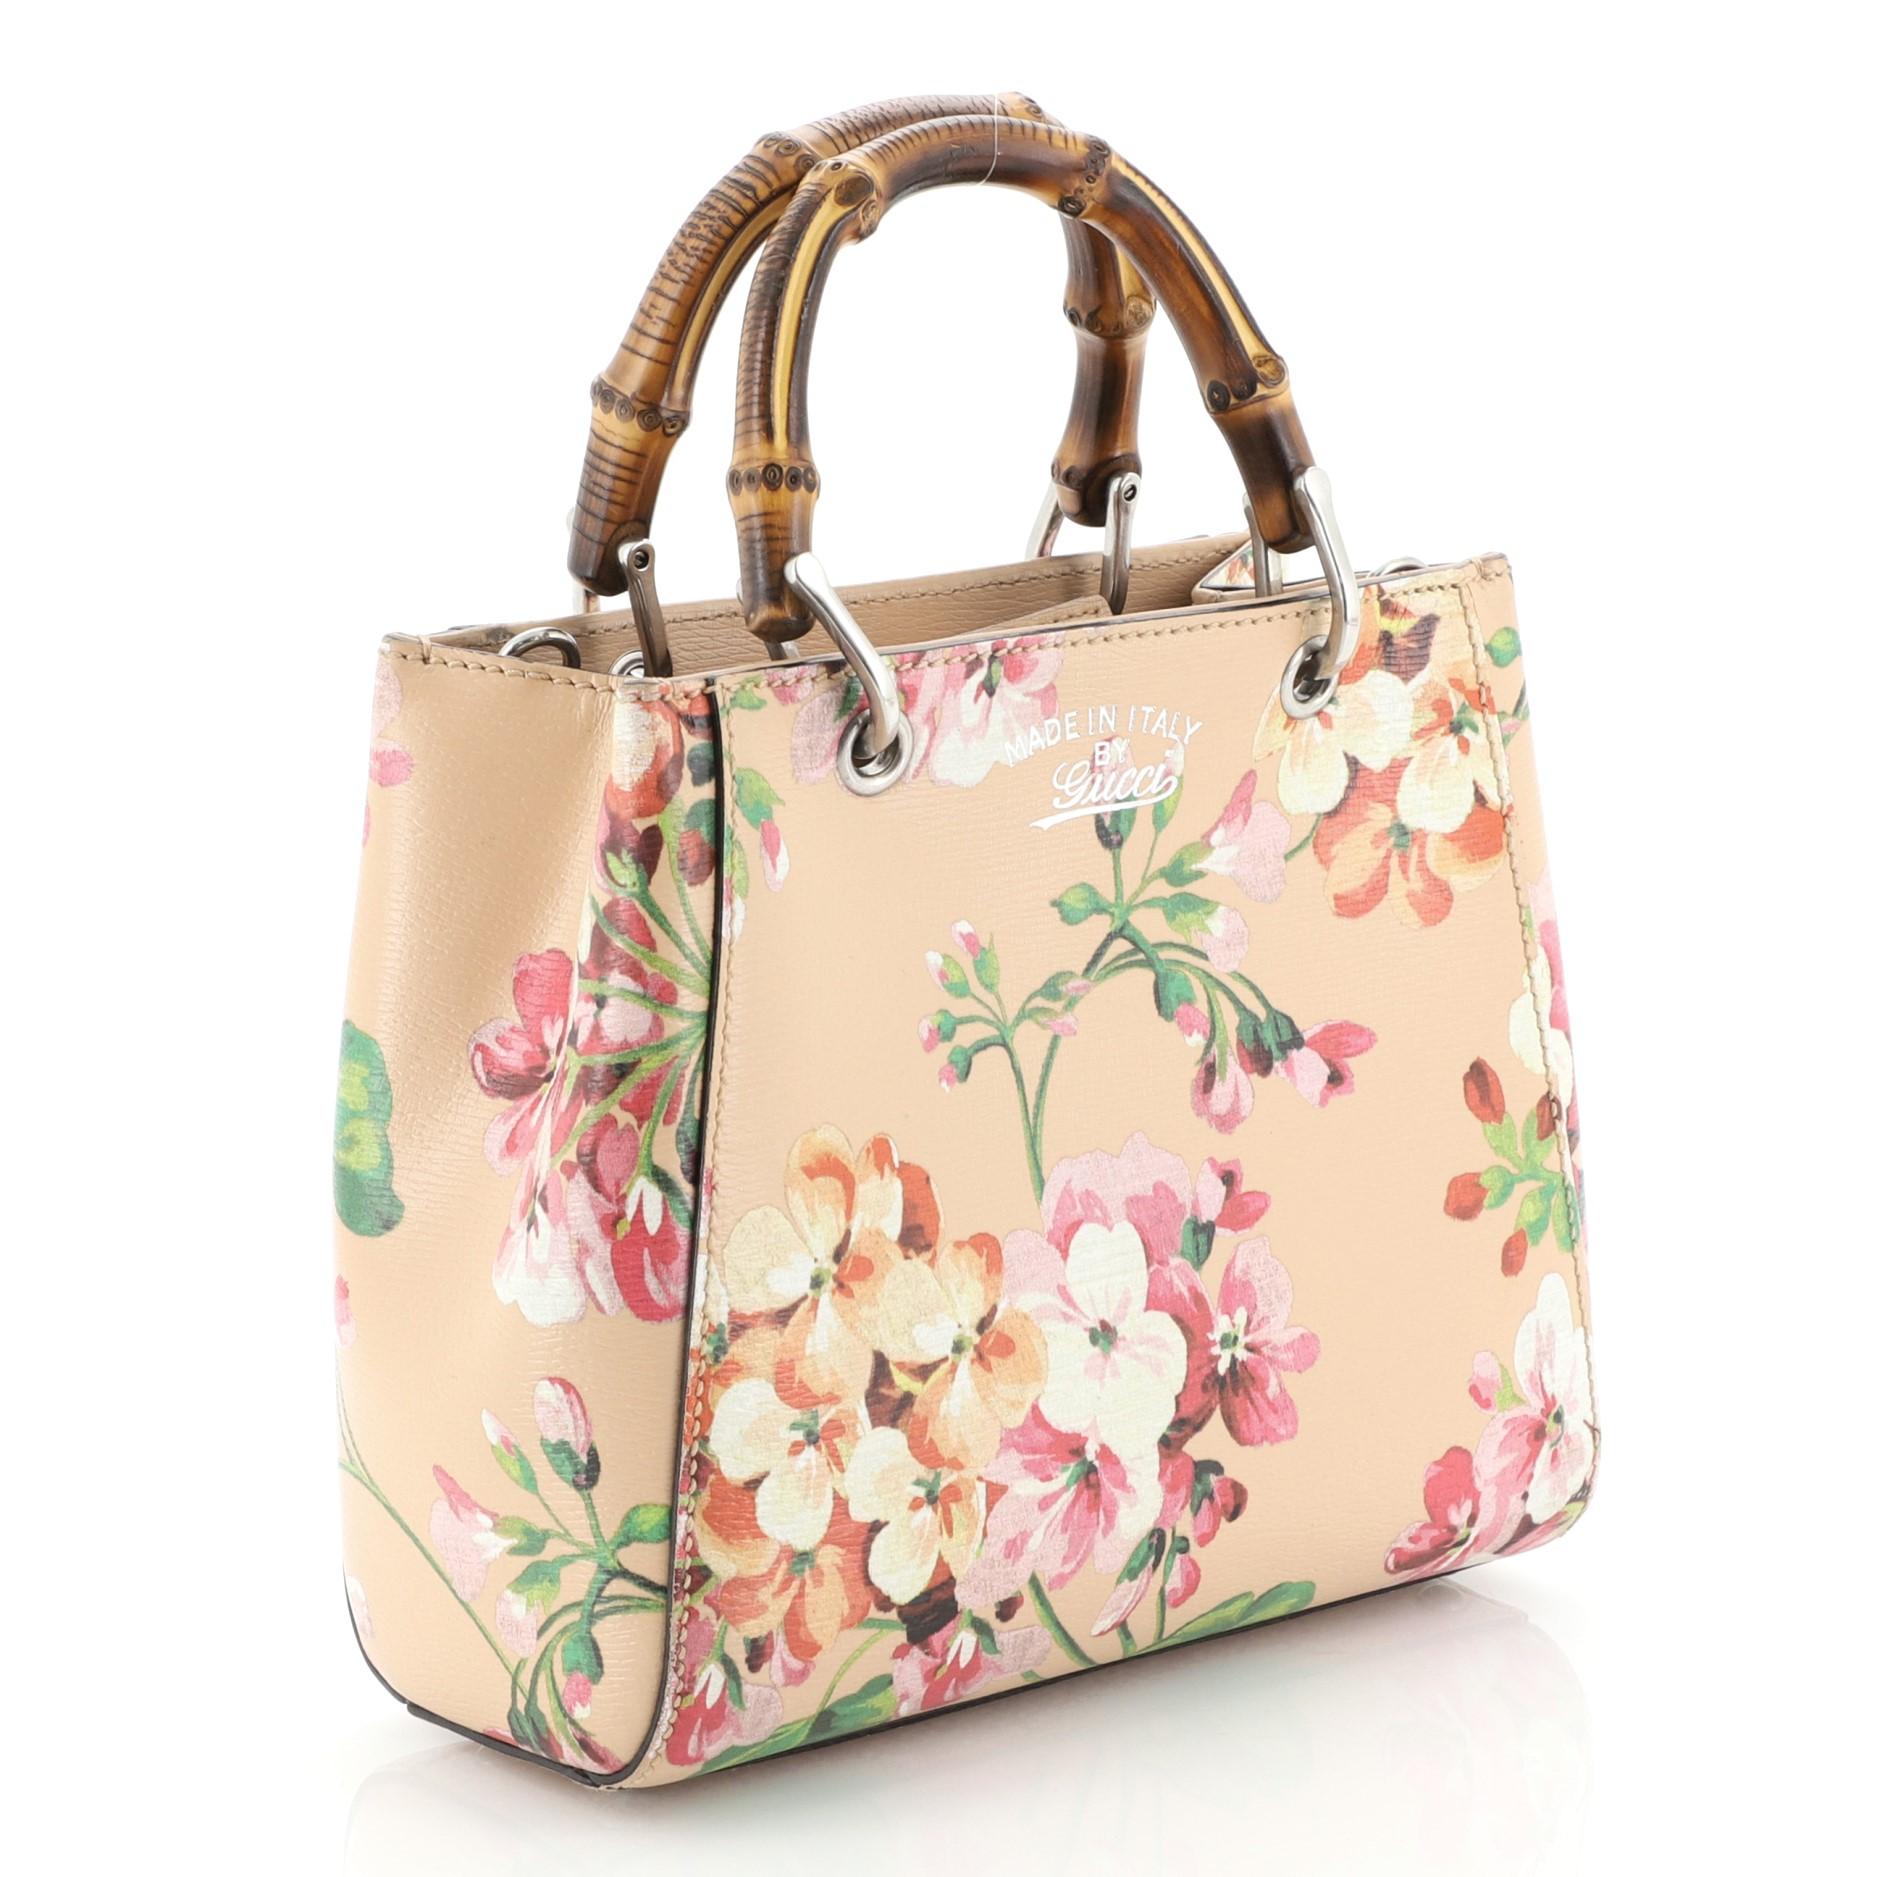 This Gucci Bamboo Shopper Tote Blooms Print Leather Mini, crafted from pink blooms printed leather, features sturdy bamboo handles, stamped logo at the front, and silver-tone hardware. Its hidden magnetic snap closure opens to a neutral fabric